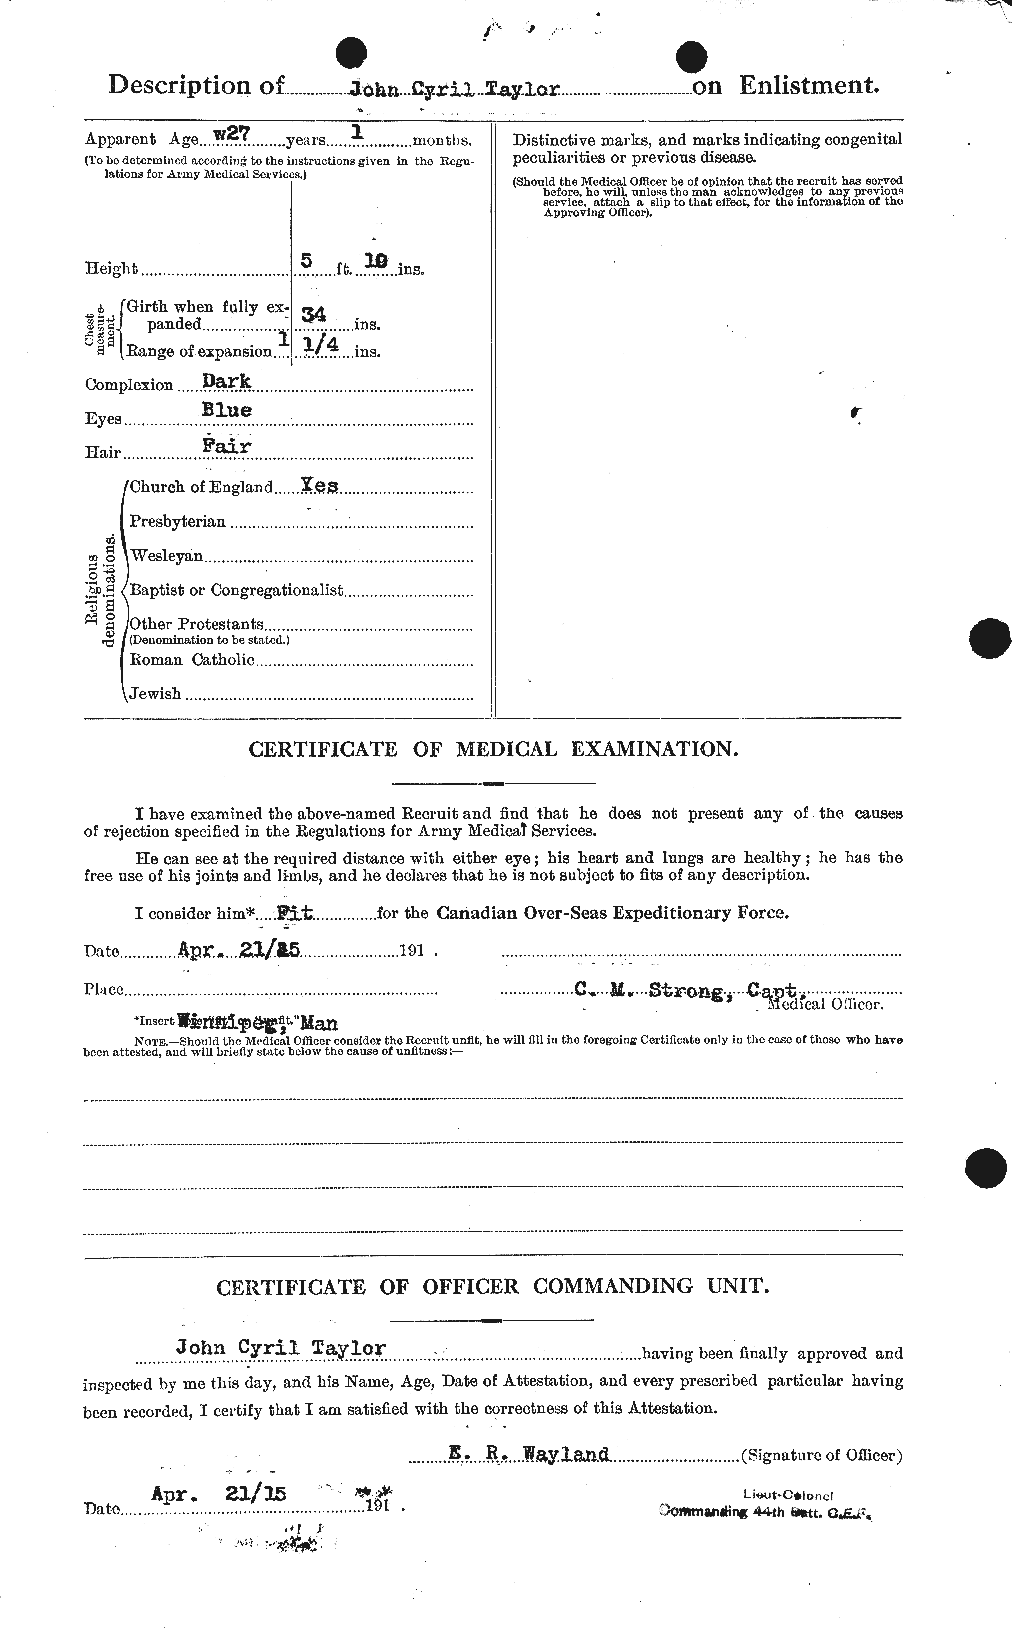 Personnel Records of the First World War - CEF 627064b